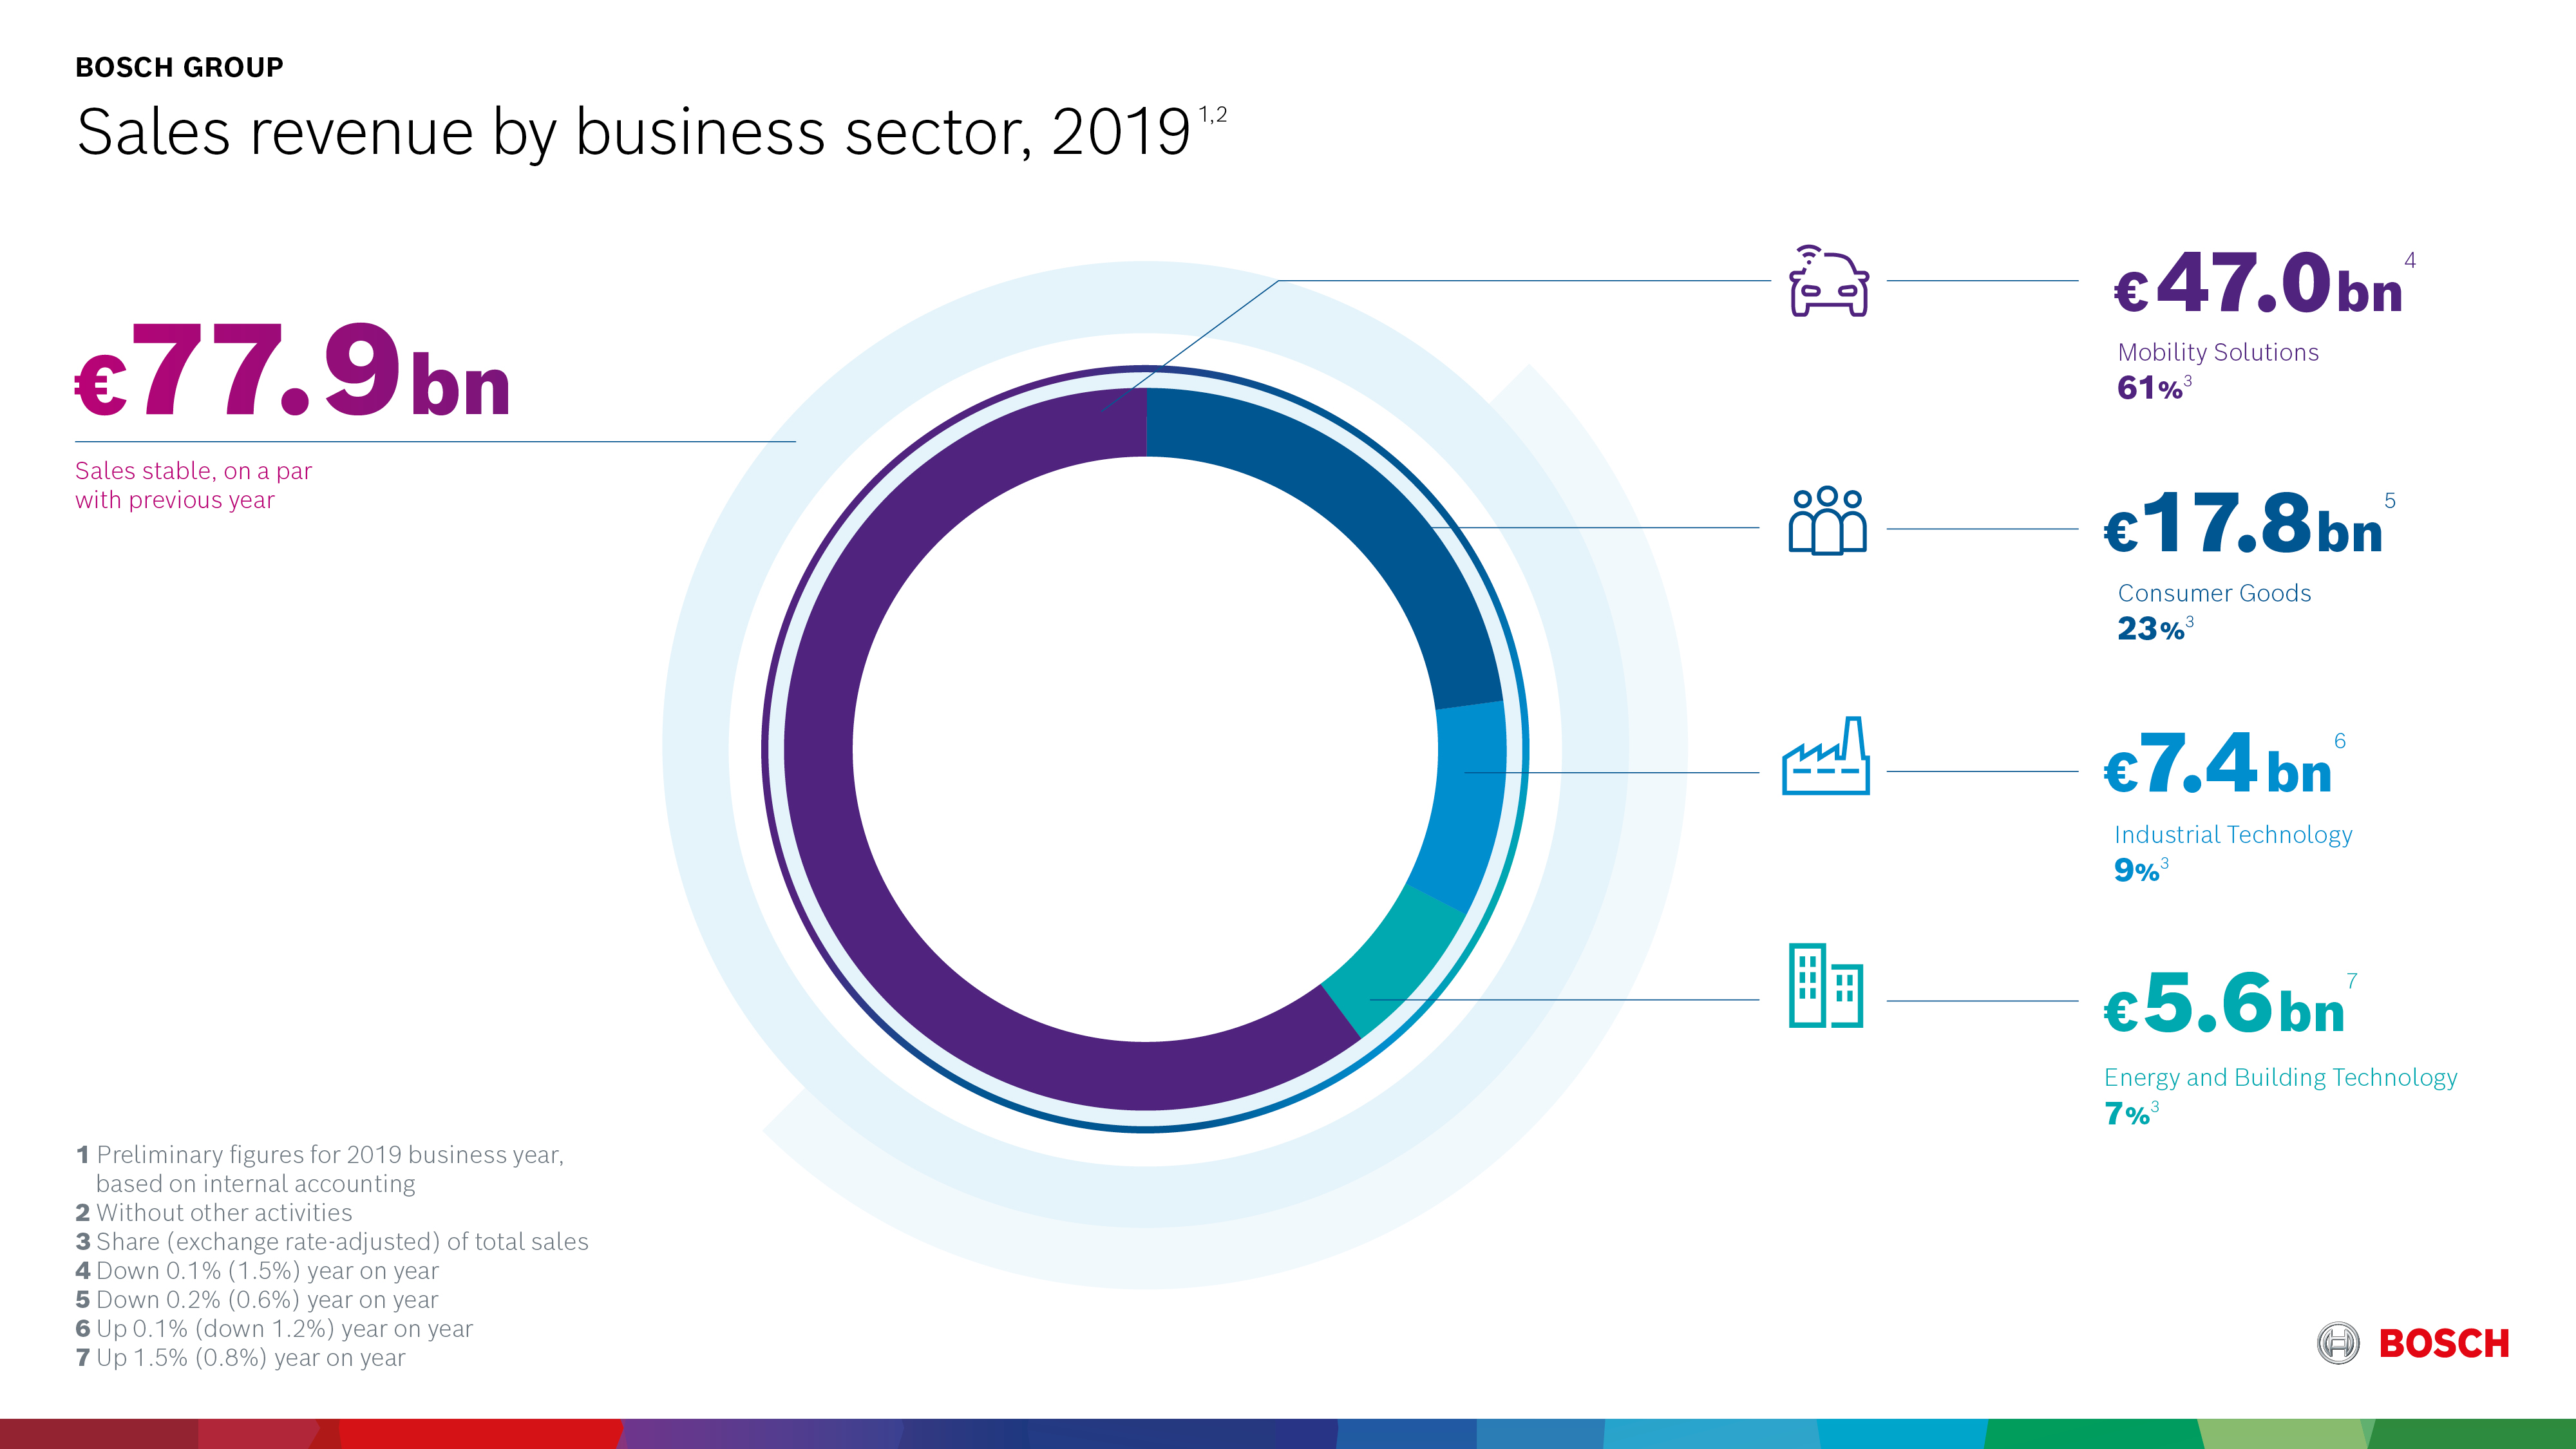 2019 sales by business sector